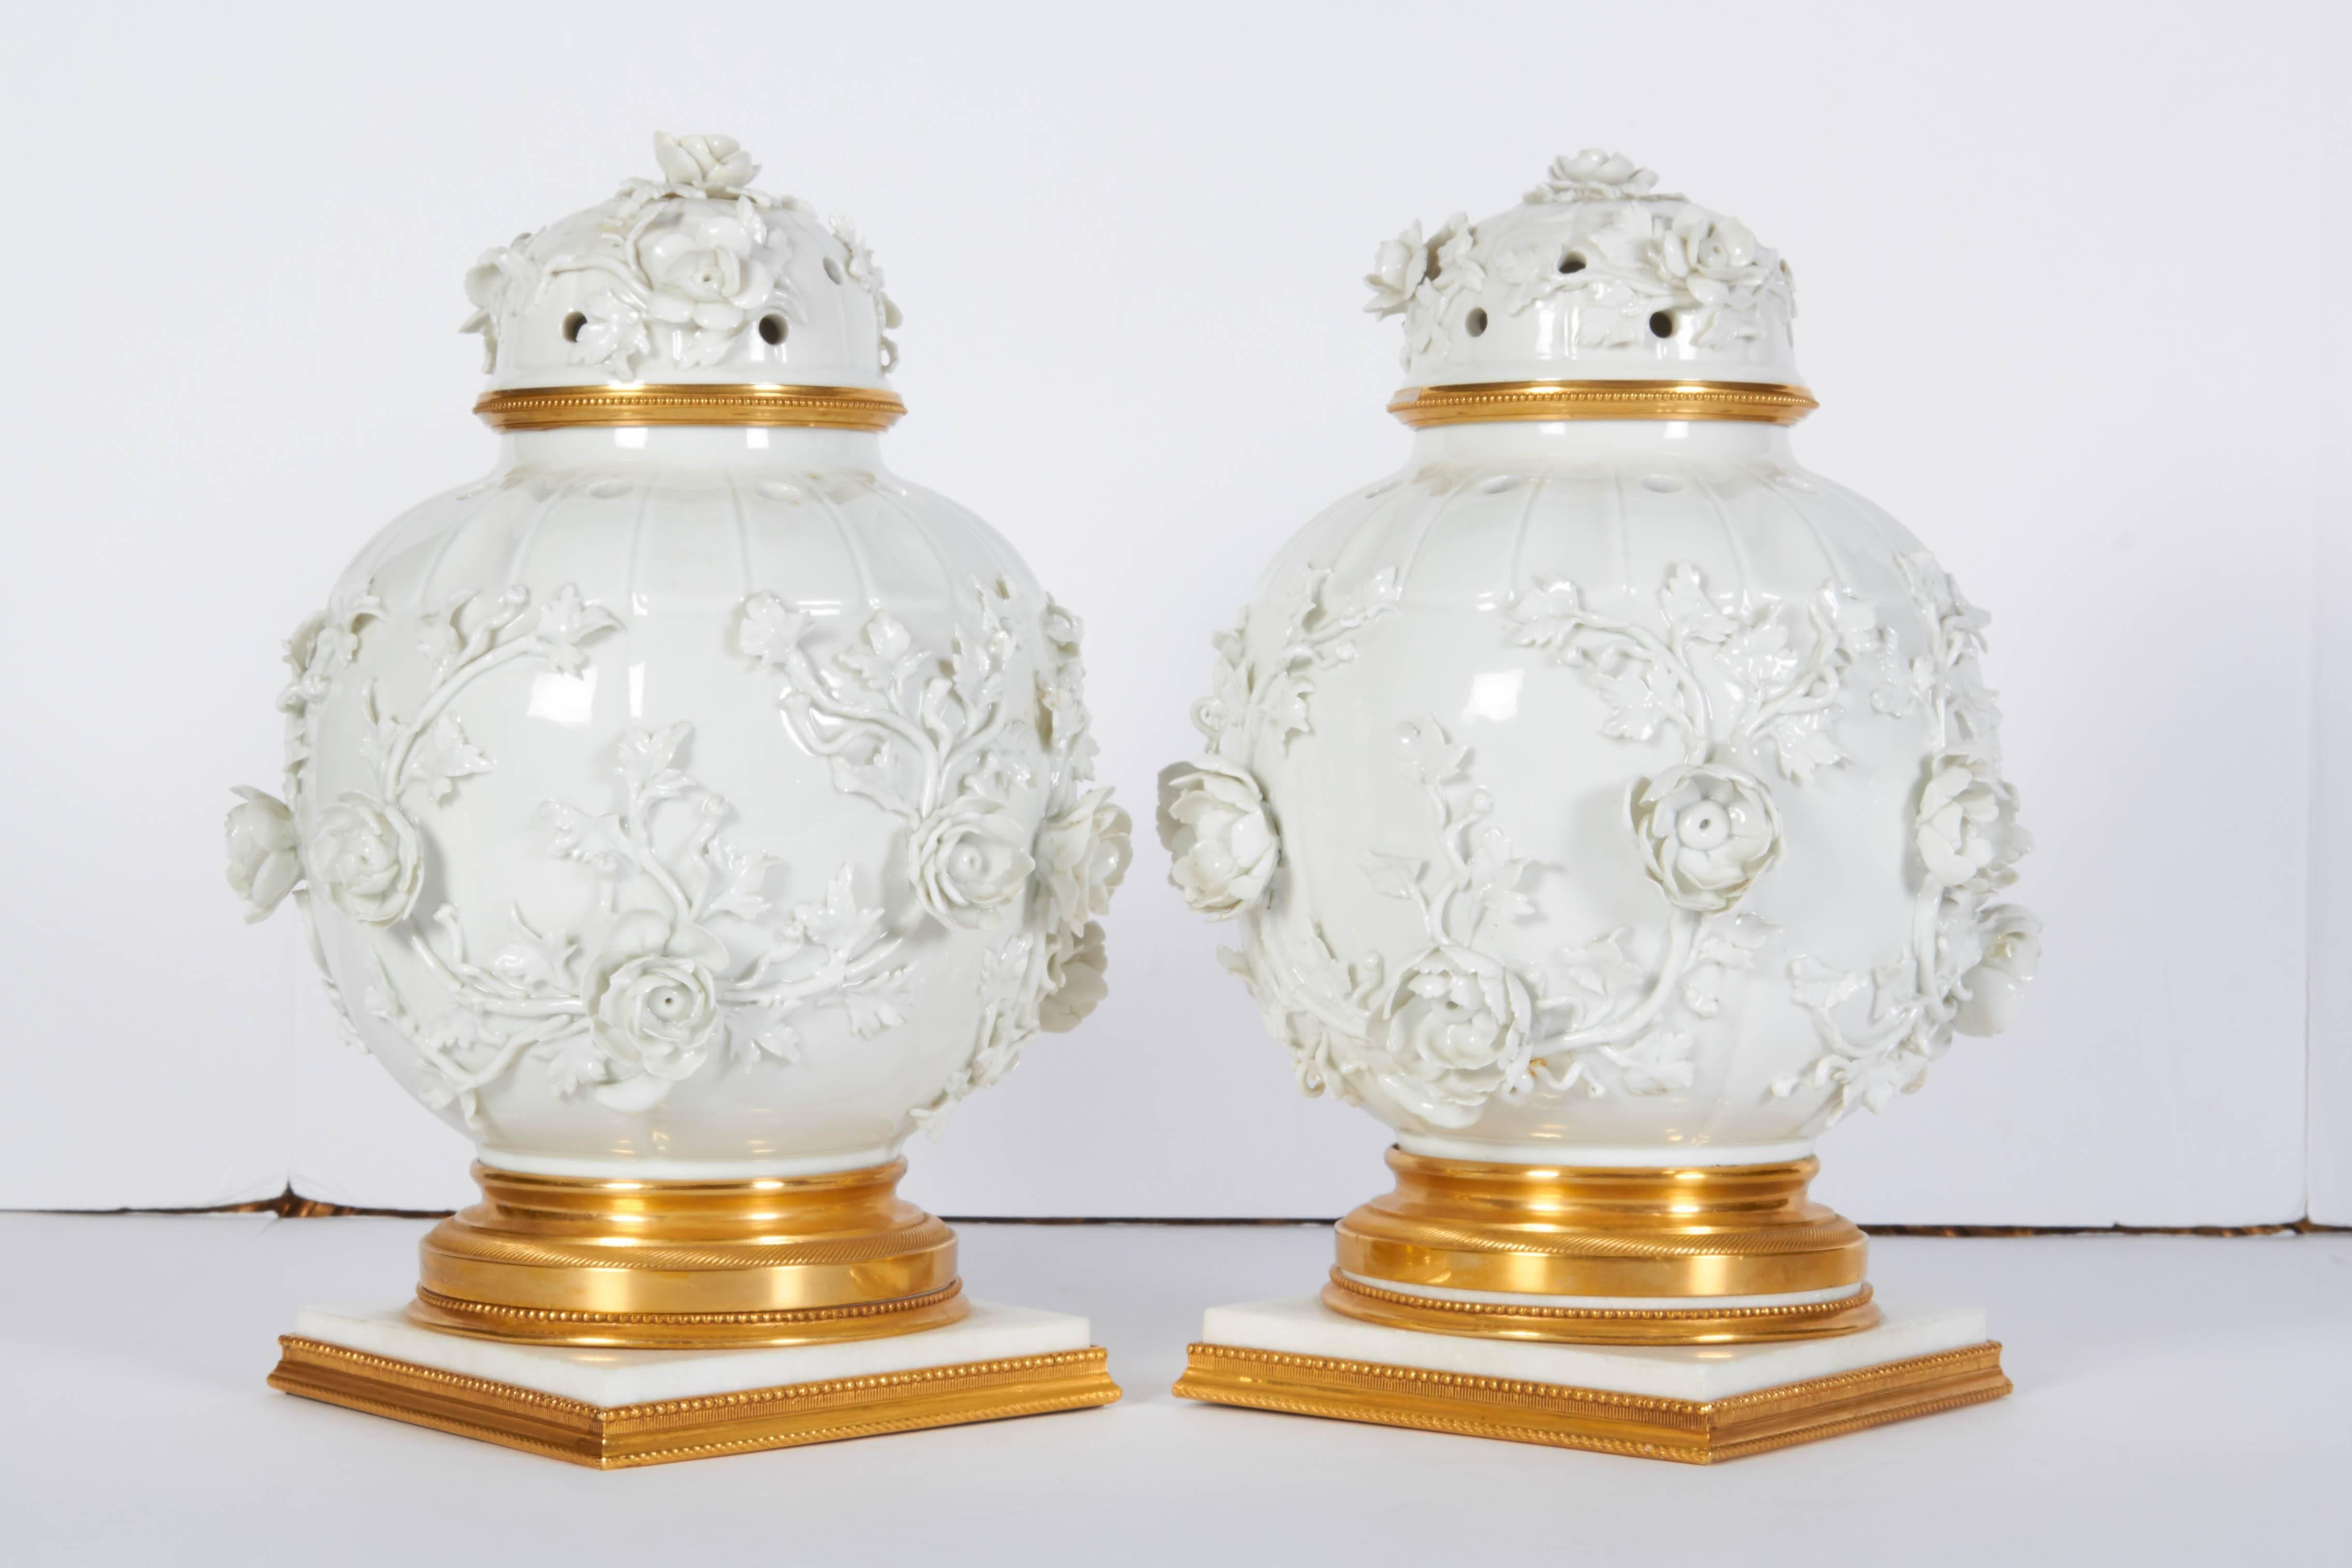 A beautiful pair of Louis XVI antique Chinese blanc de chine porcelain and French ormolu-mounted Potpouri vases and covers, with applied raised flowers and leaves. The Early Chinese porcelain vases mounted in Louis XVI French doré bronze mounts made